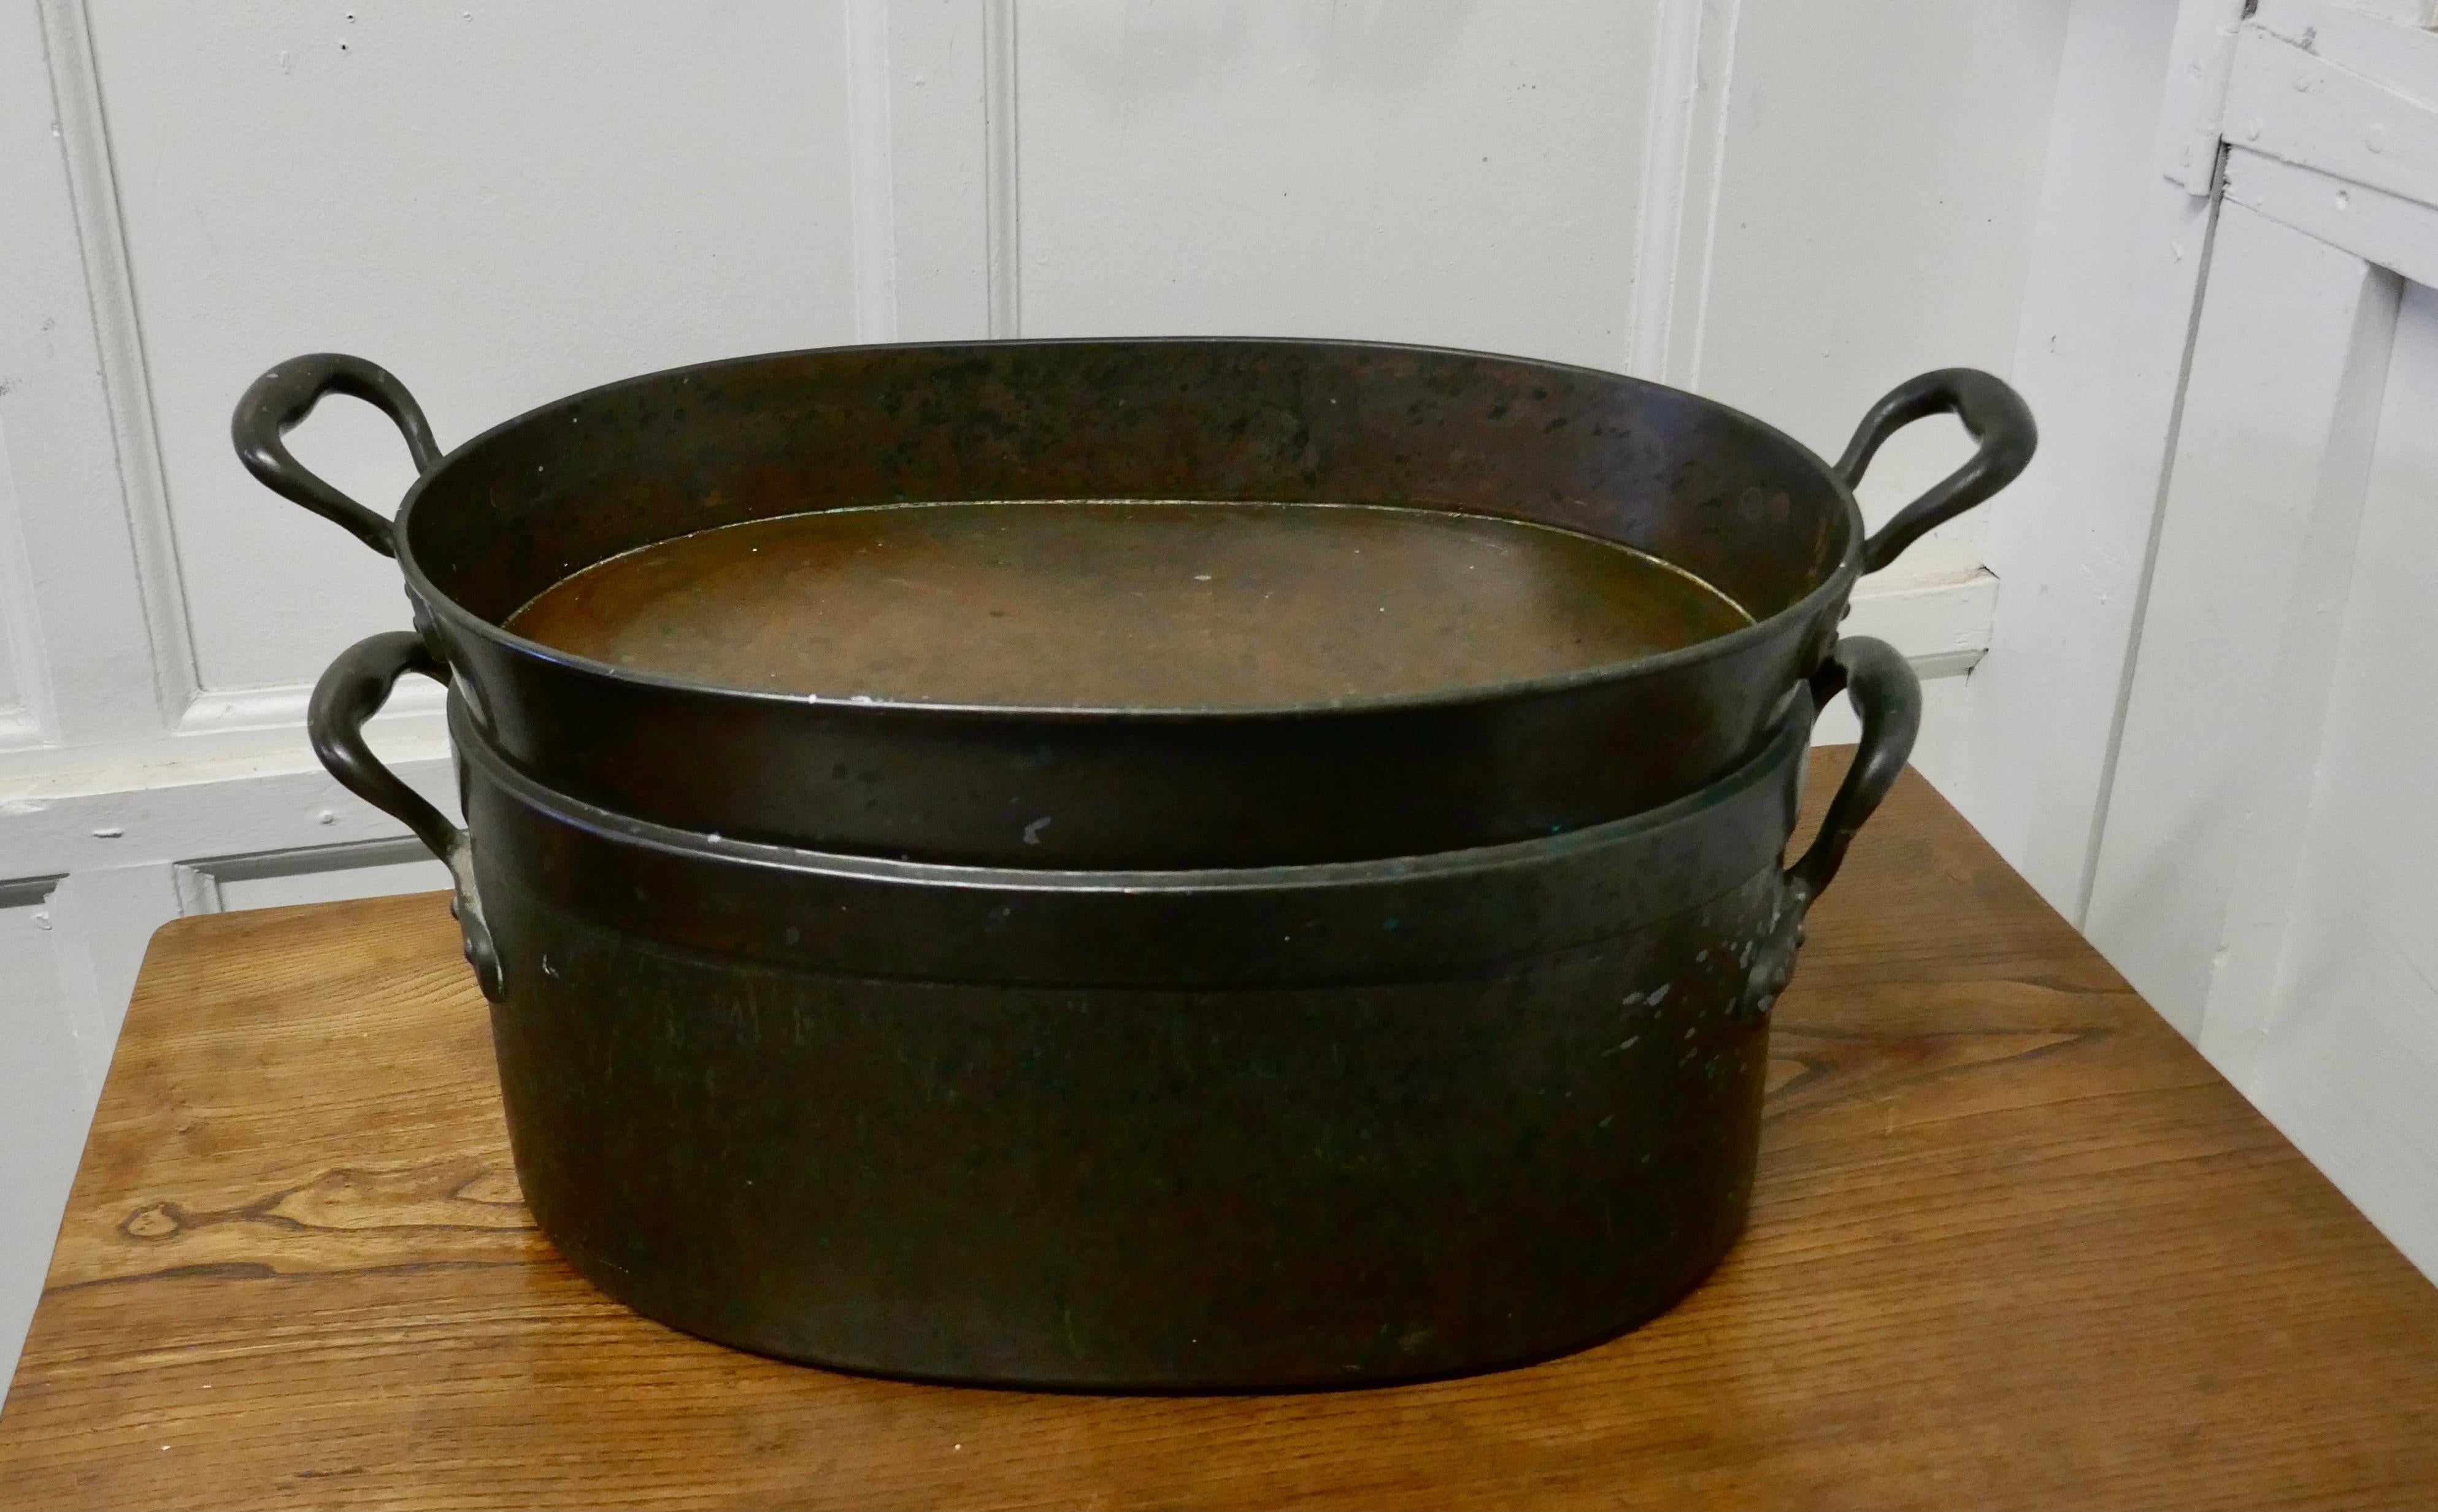 Very rare 19th century copper bain marie

This is a lovely looking and very rare find, a 19th century double sauce Pan, now we call this a Bain Marie, the bottom pan when full of water keeps the upper pan hot but free from direct heat
The top pan